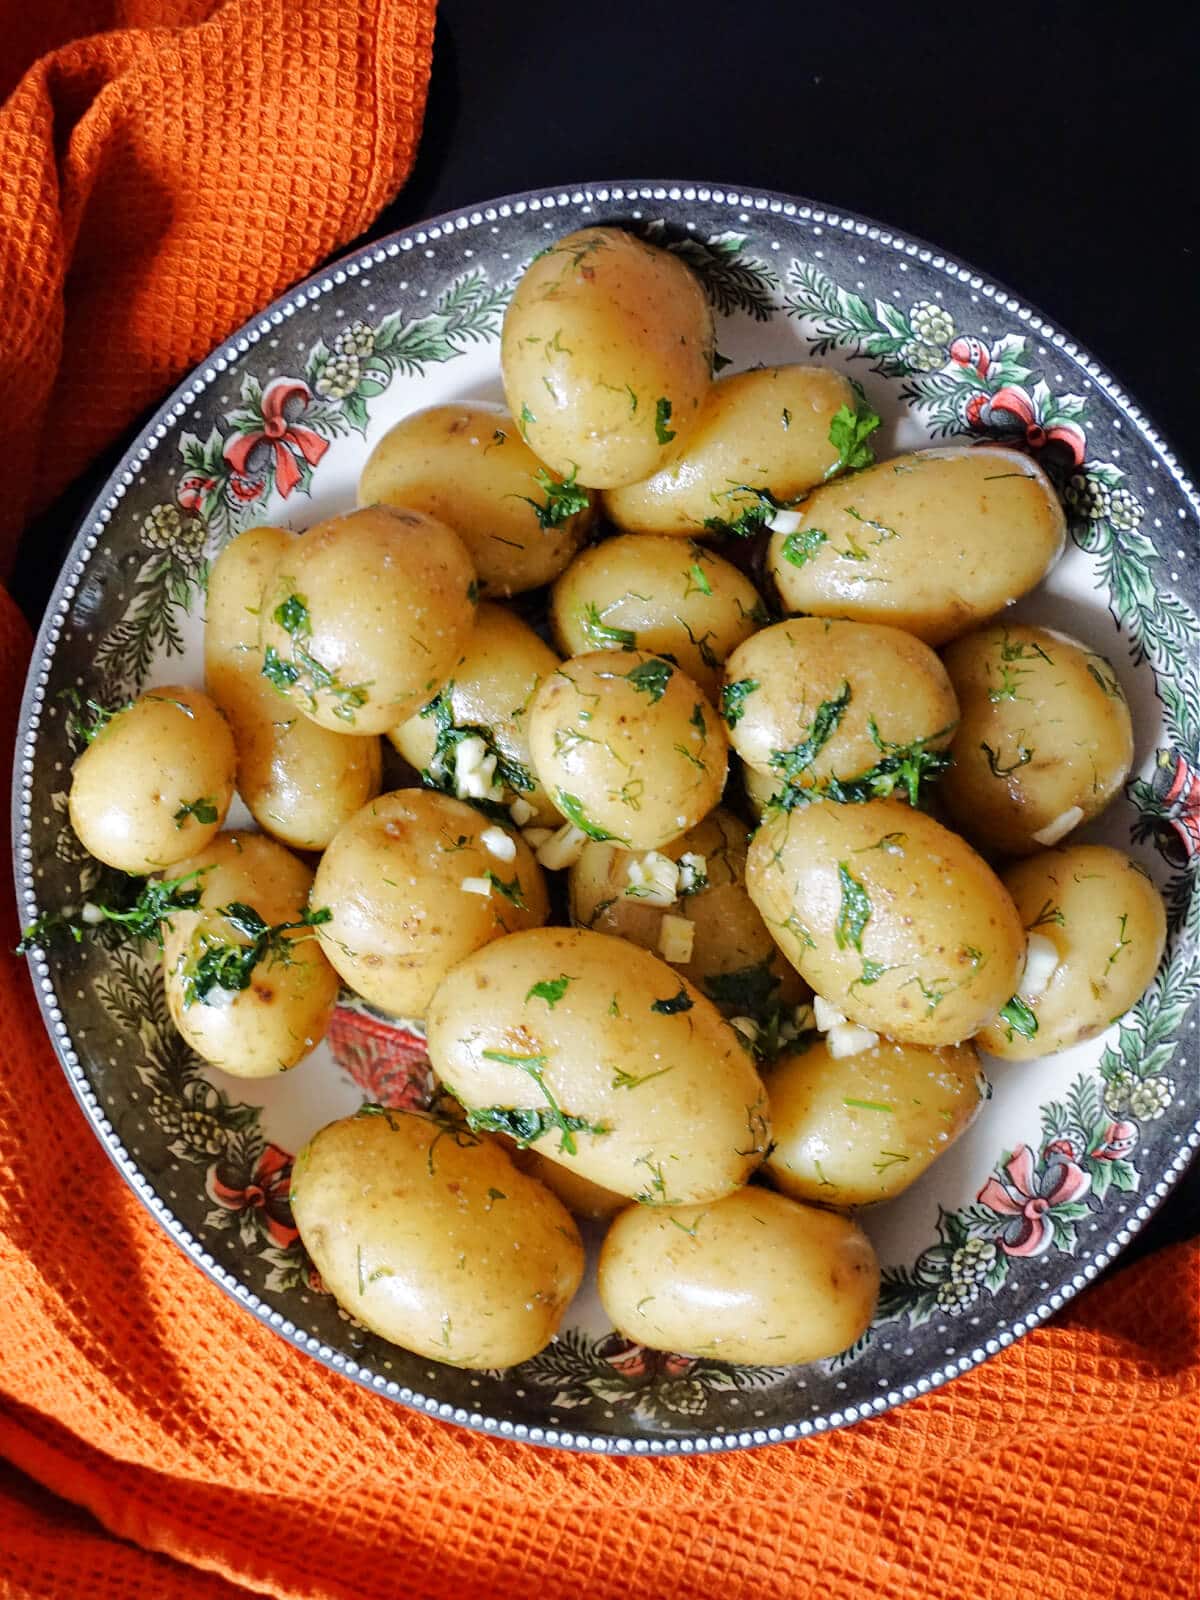 A pan of baby potatoes with herbs and garlic.